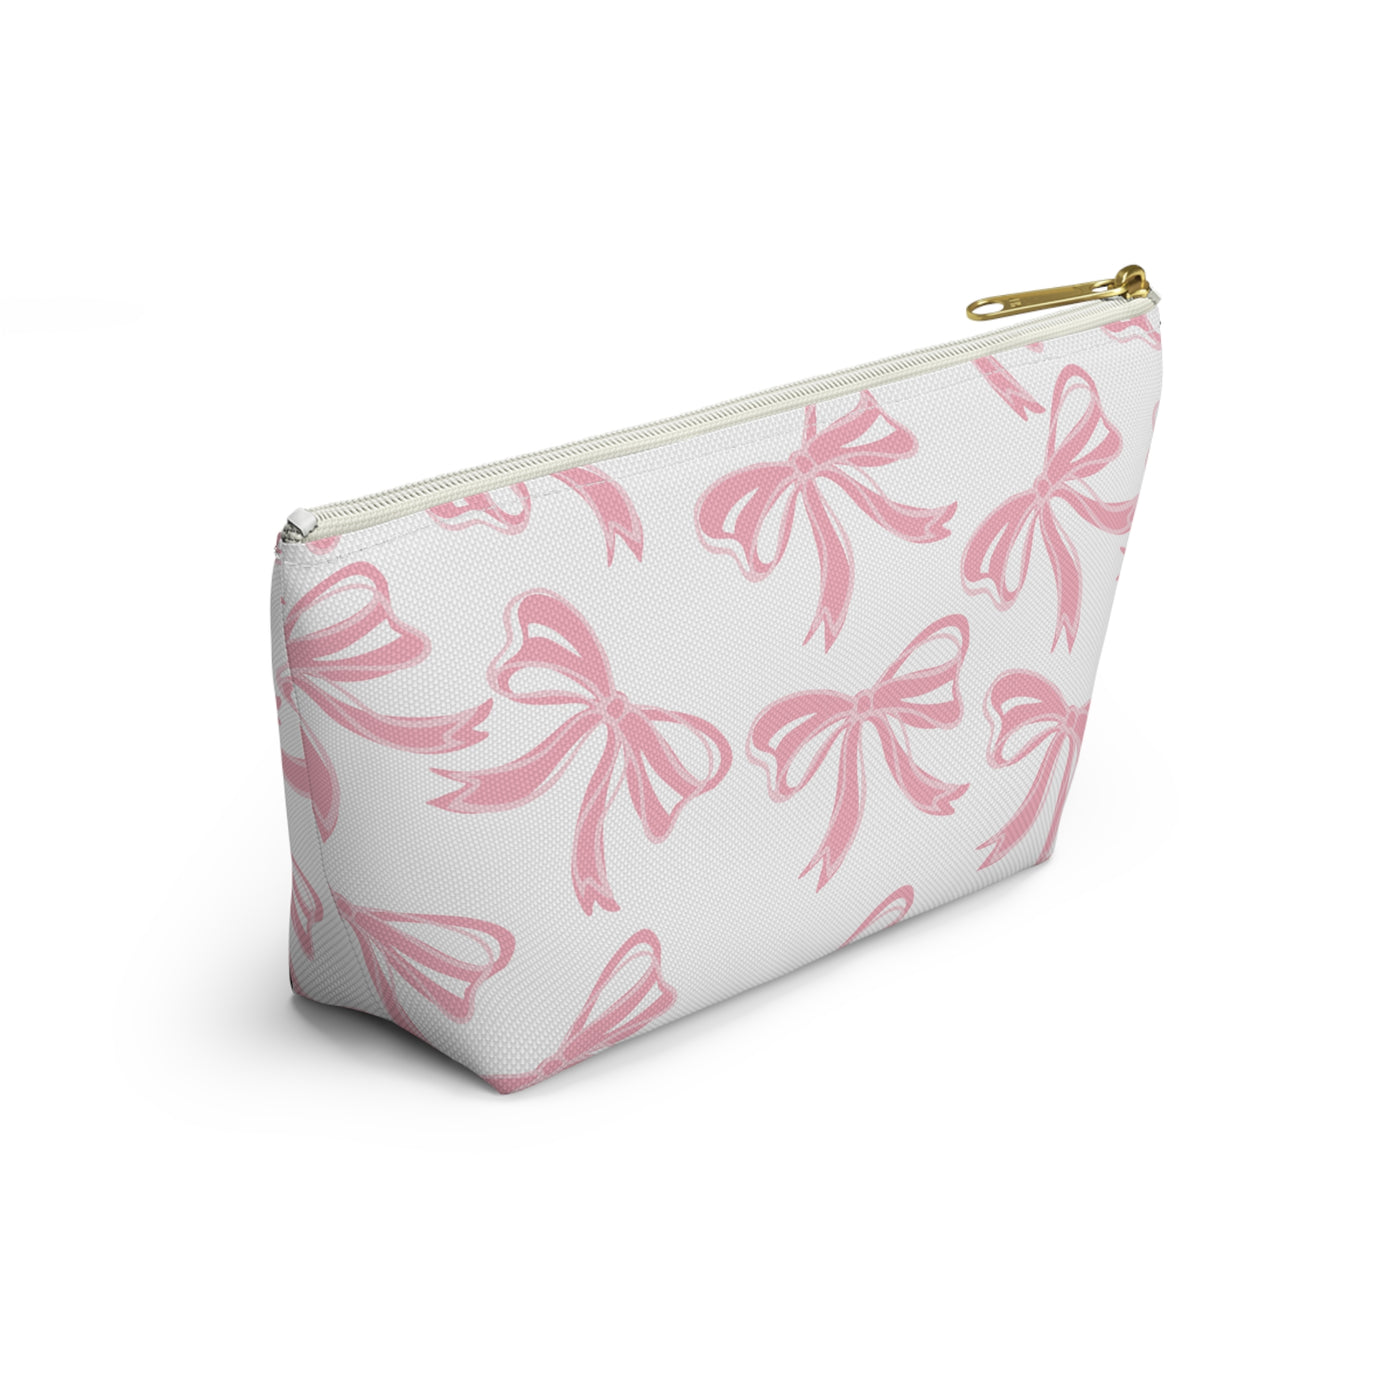 Coquette Pink Bow Monogram Makeup Bag, Blue French Toile Makeup Bag, Coquette Accessories, Pink Accessories, Pink Coquette Makeup Bag